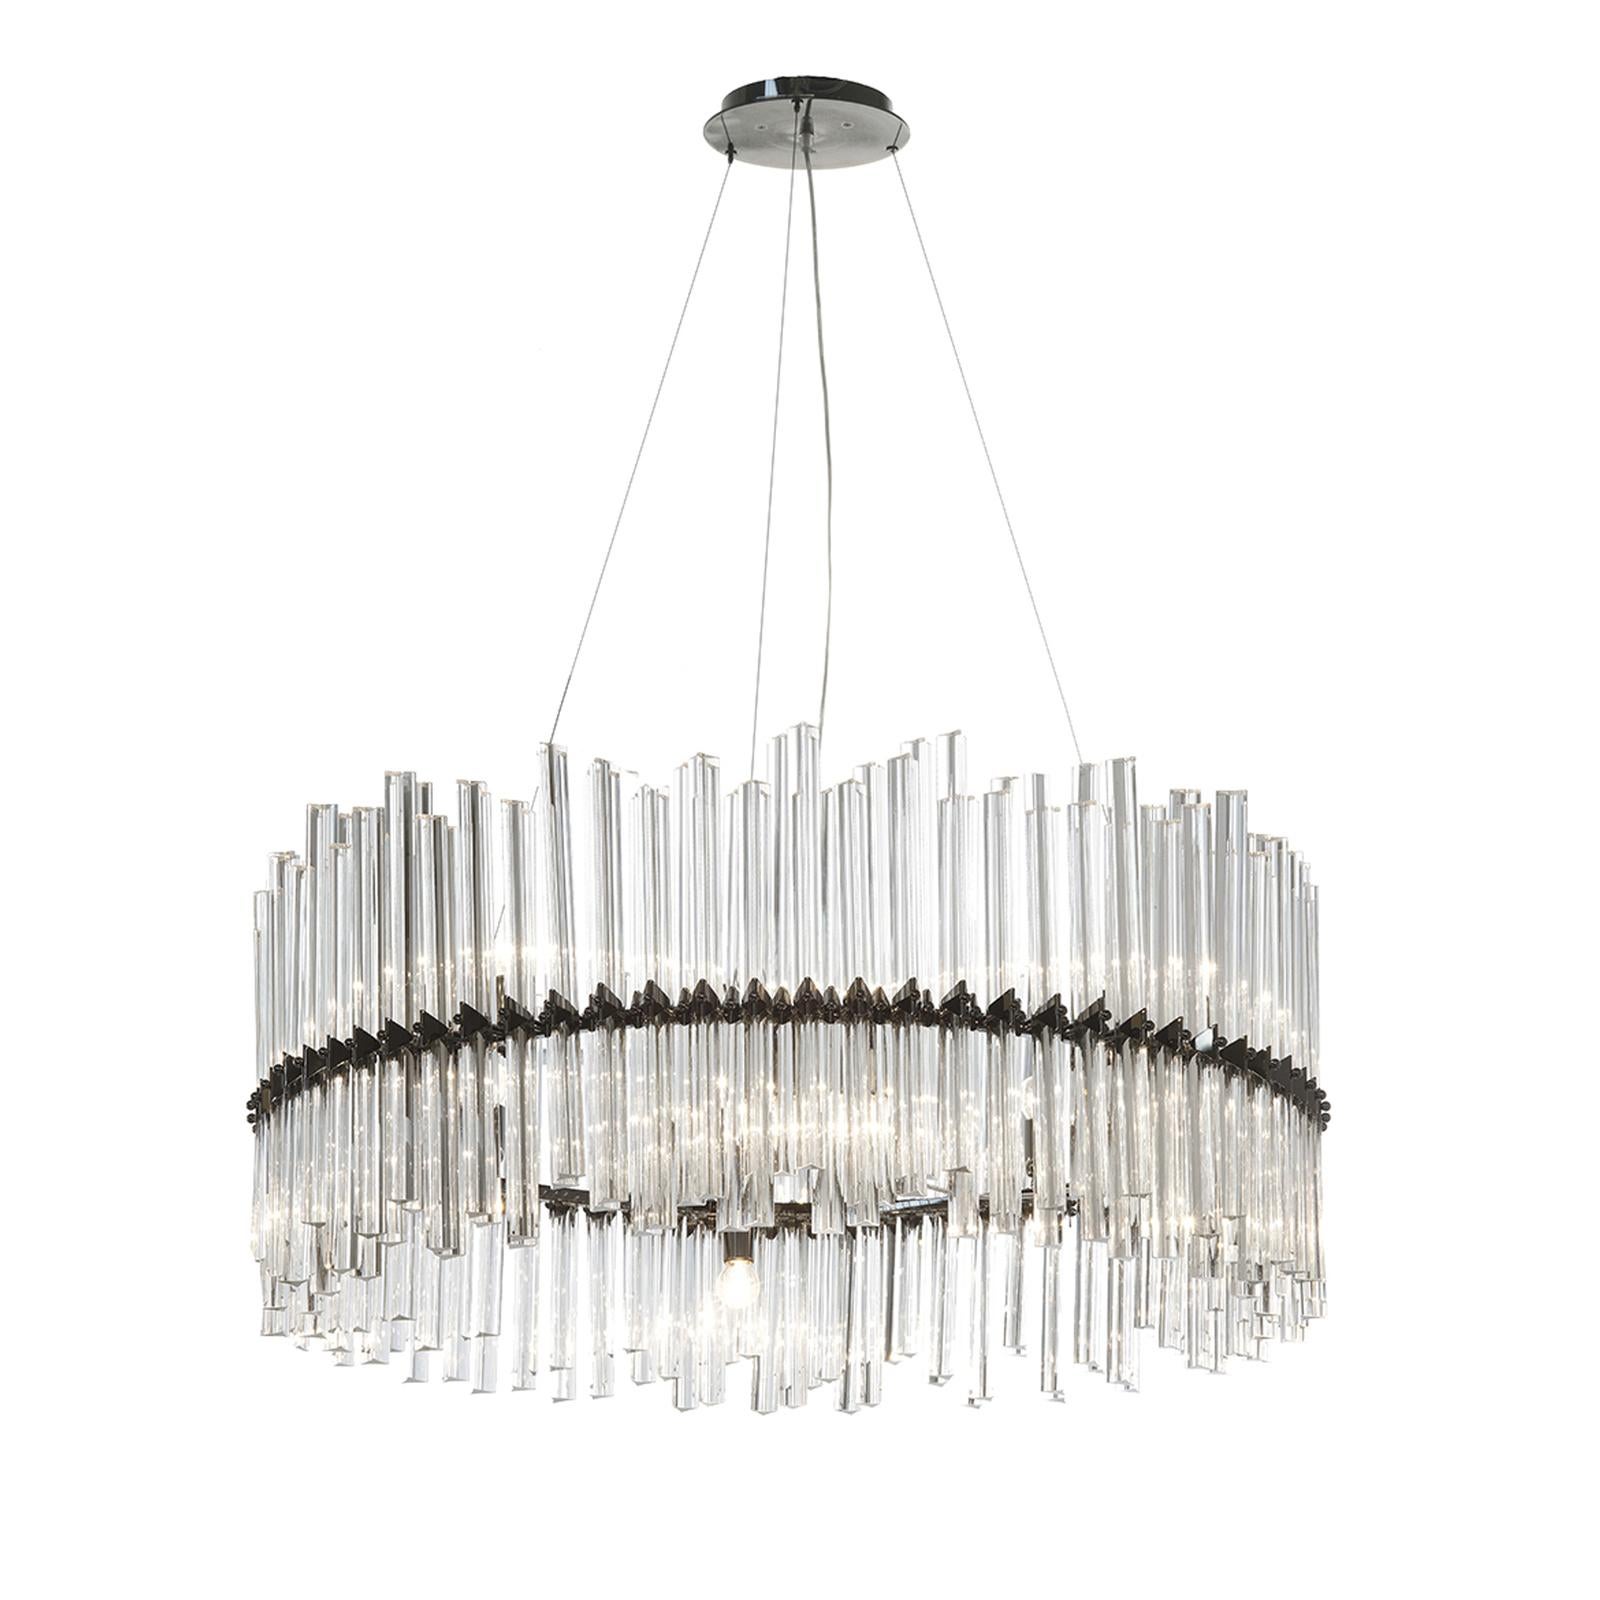 Part of the Ring collection, this unique chandelier is inspired by the bold sophistication of the art deco style, with its rigorous silhouettes and complex textures. The metal structure consists in a top base that supports a circular, ring-shaped